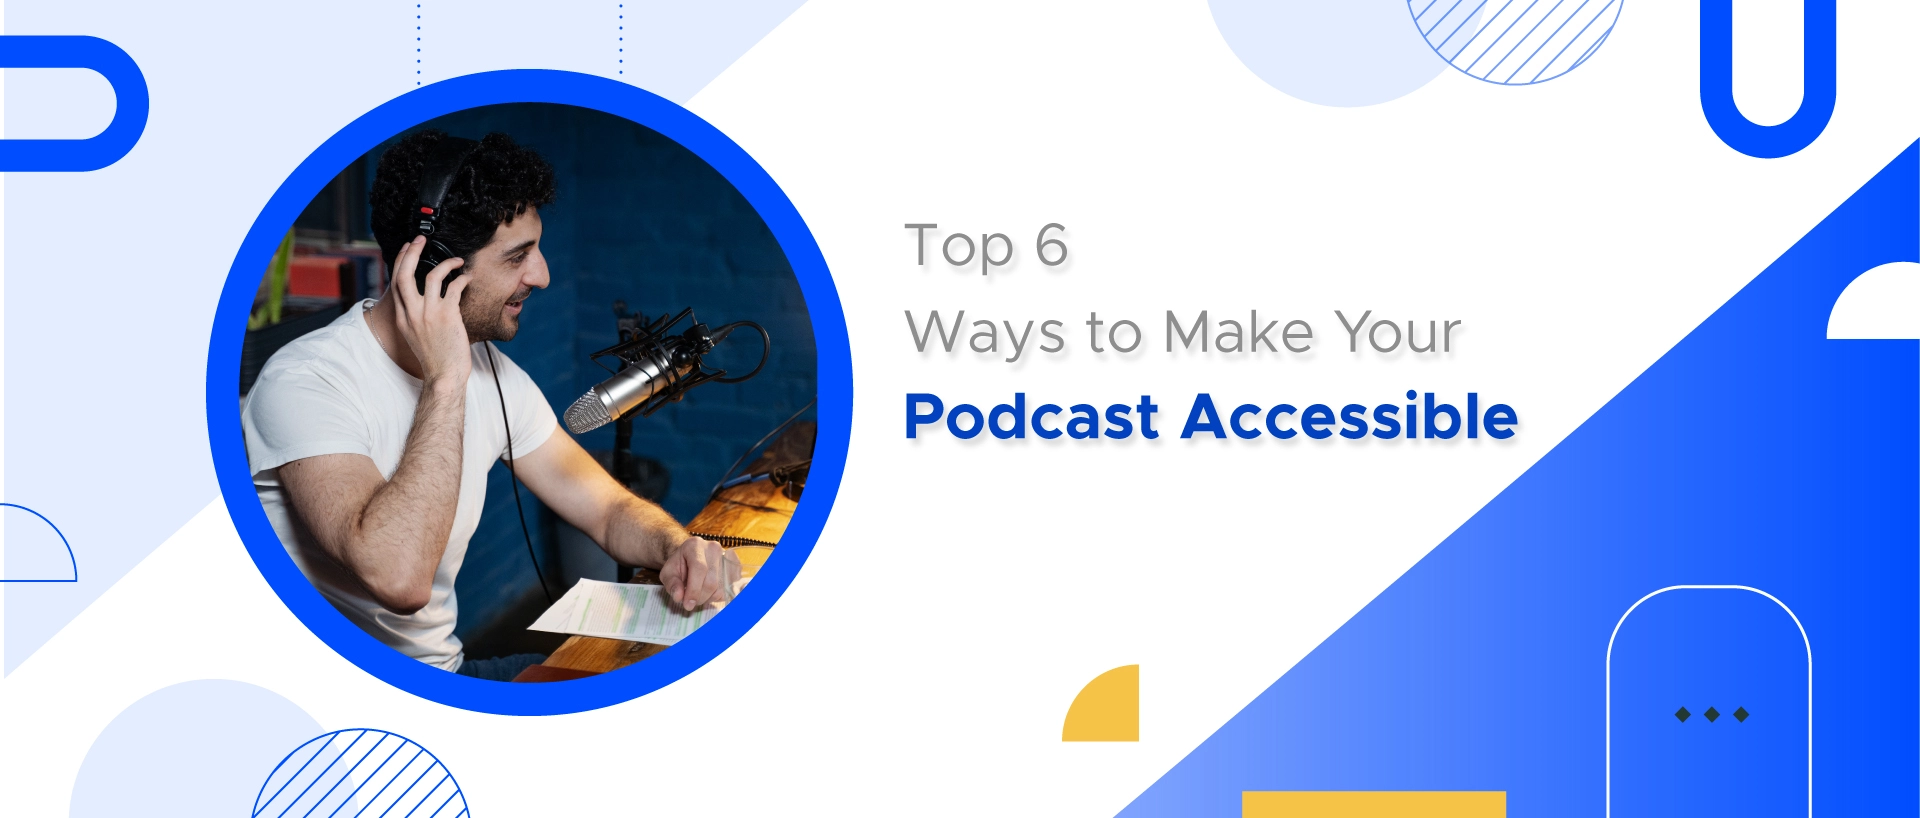 6 Top Ways to Make Your Podcast Accessible